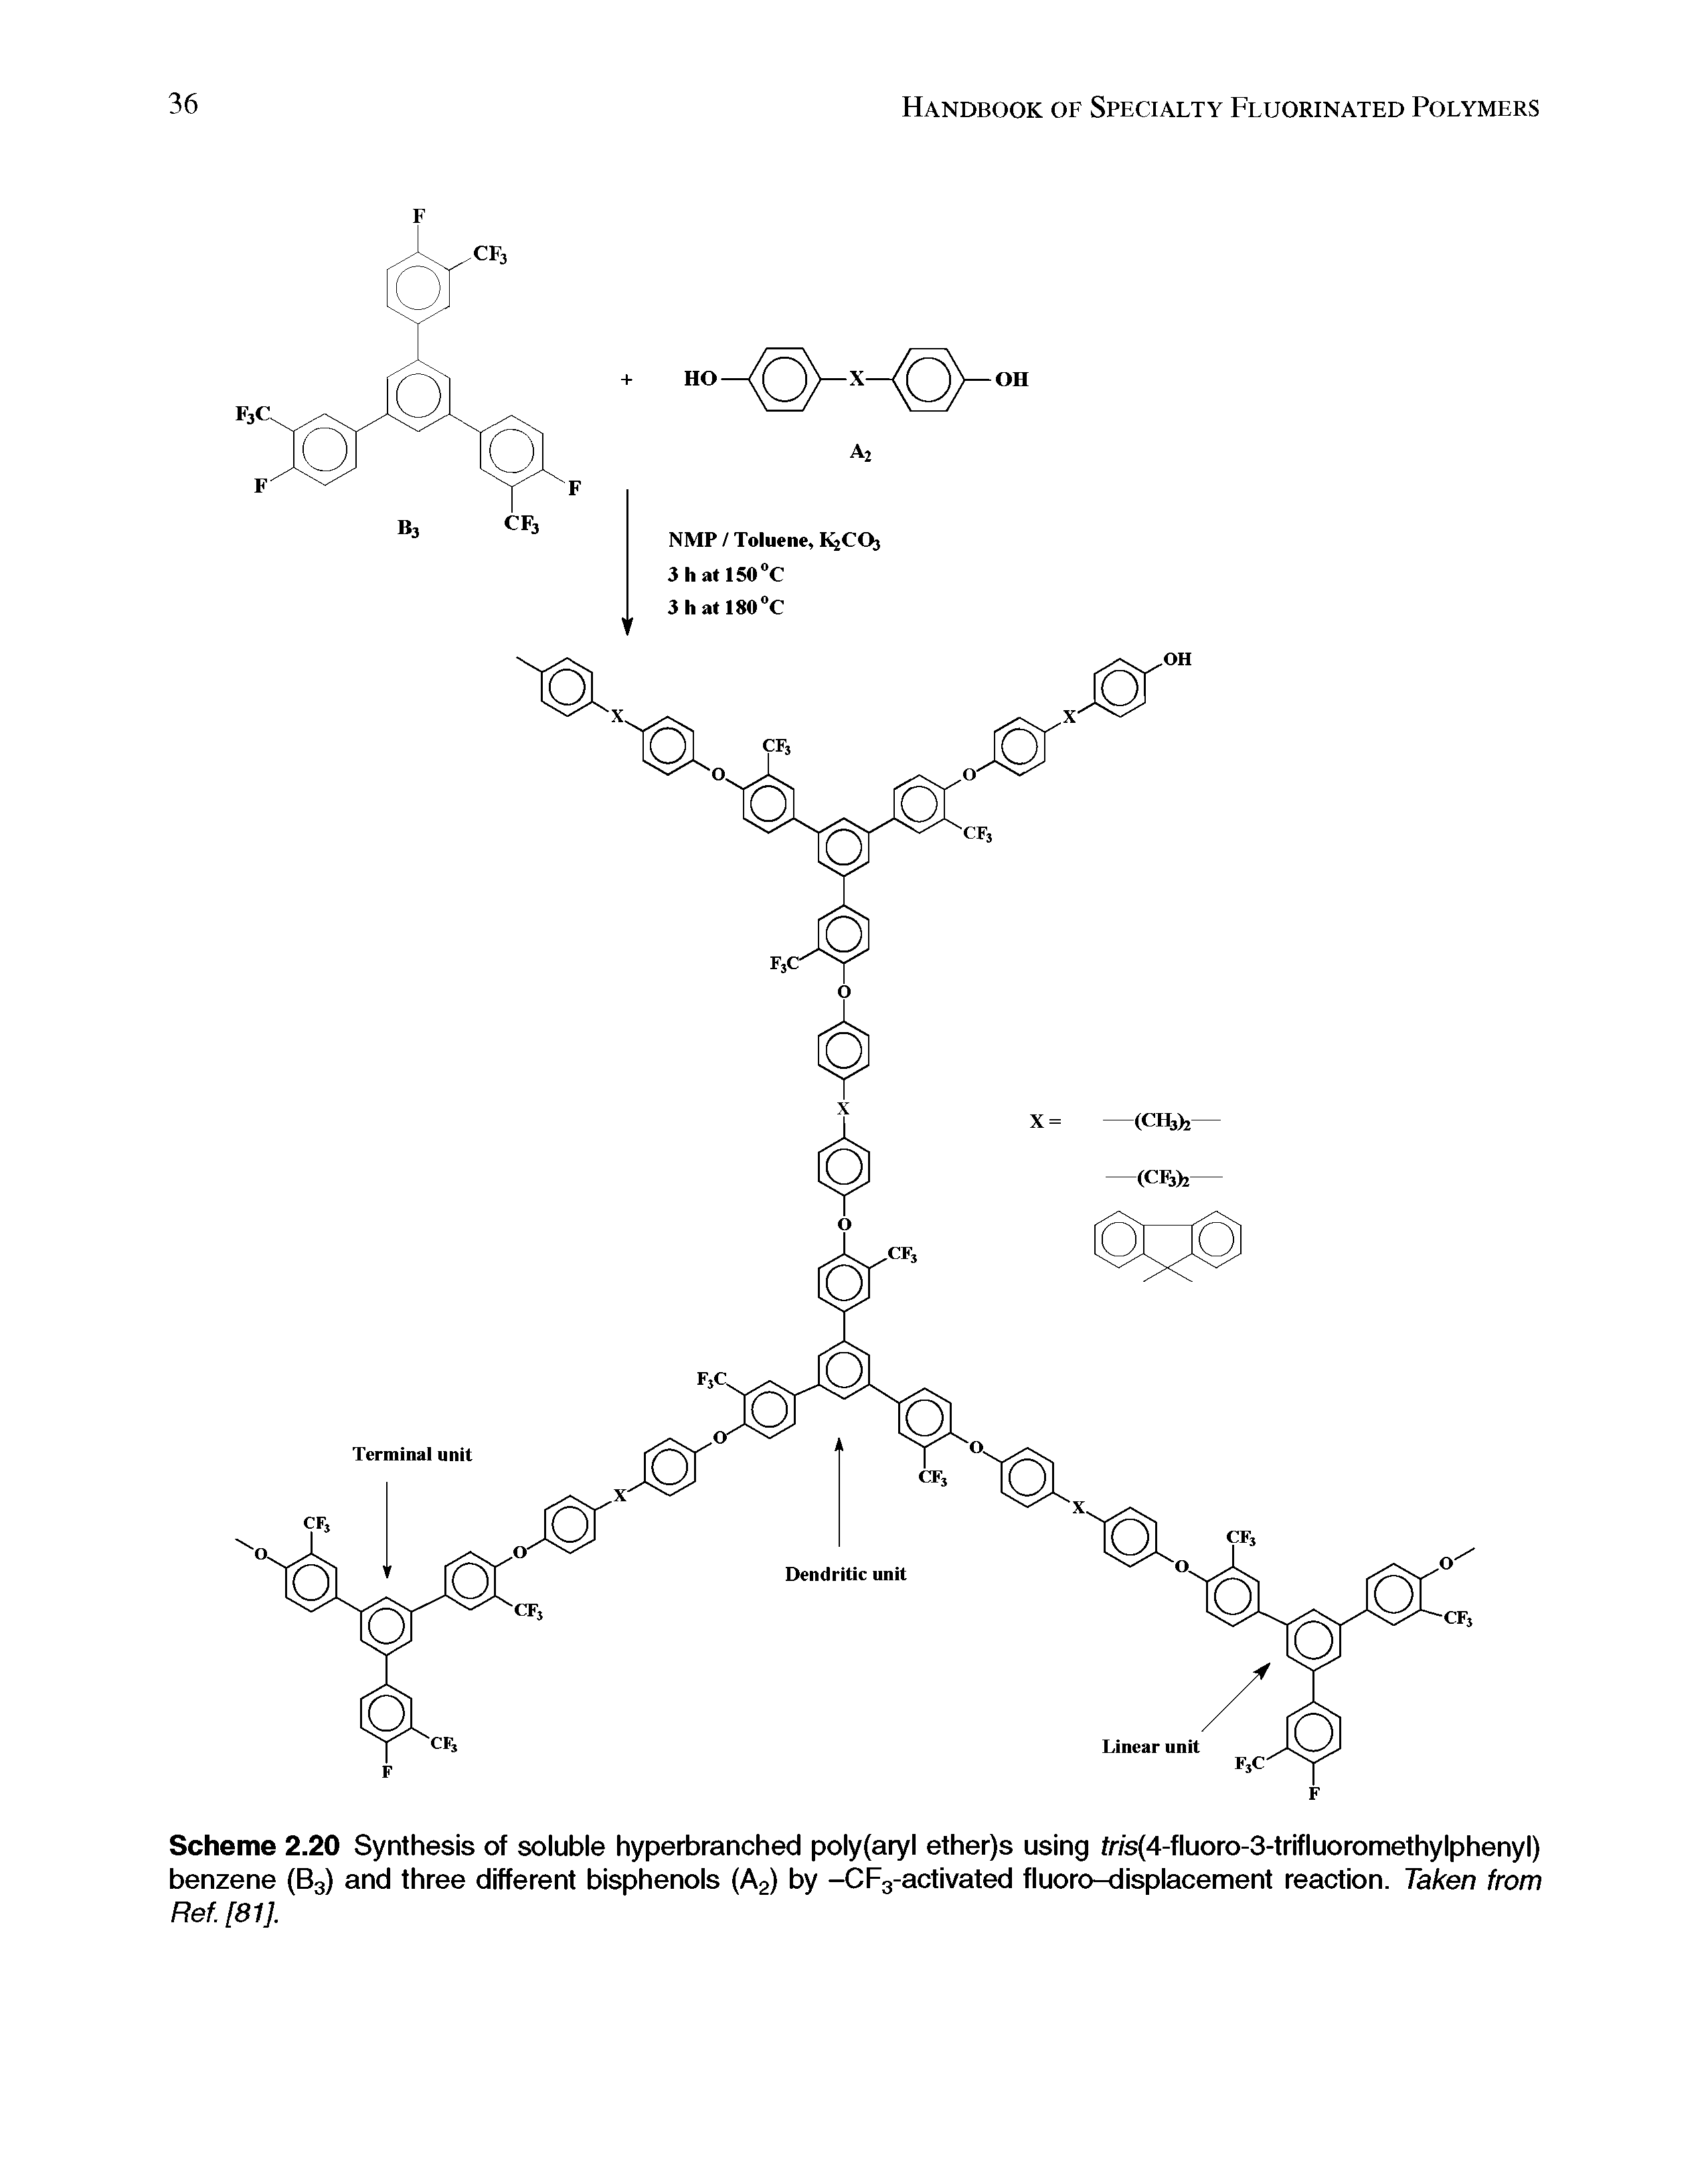 Scheme 2.20 Synthesis of soluble hyperbranched poly(aryl ether)s using fr/s(4-fluoro-3-trifluoromethylphenyl) benzene (63) and three different bisphenols (A2) by -CFa-activated fluoro-displacement reaction. Taken from Ref. [81].